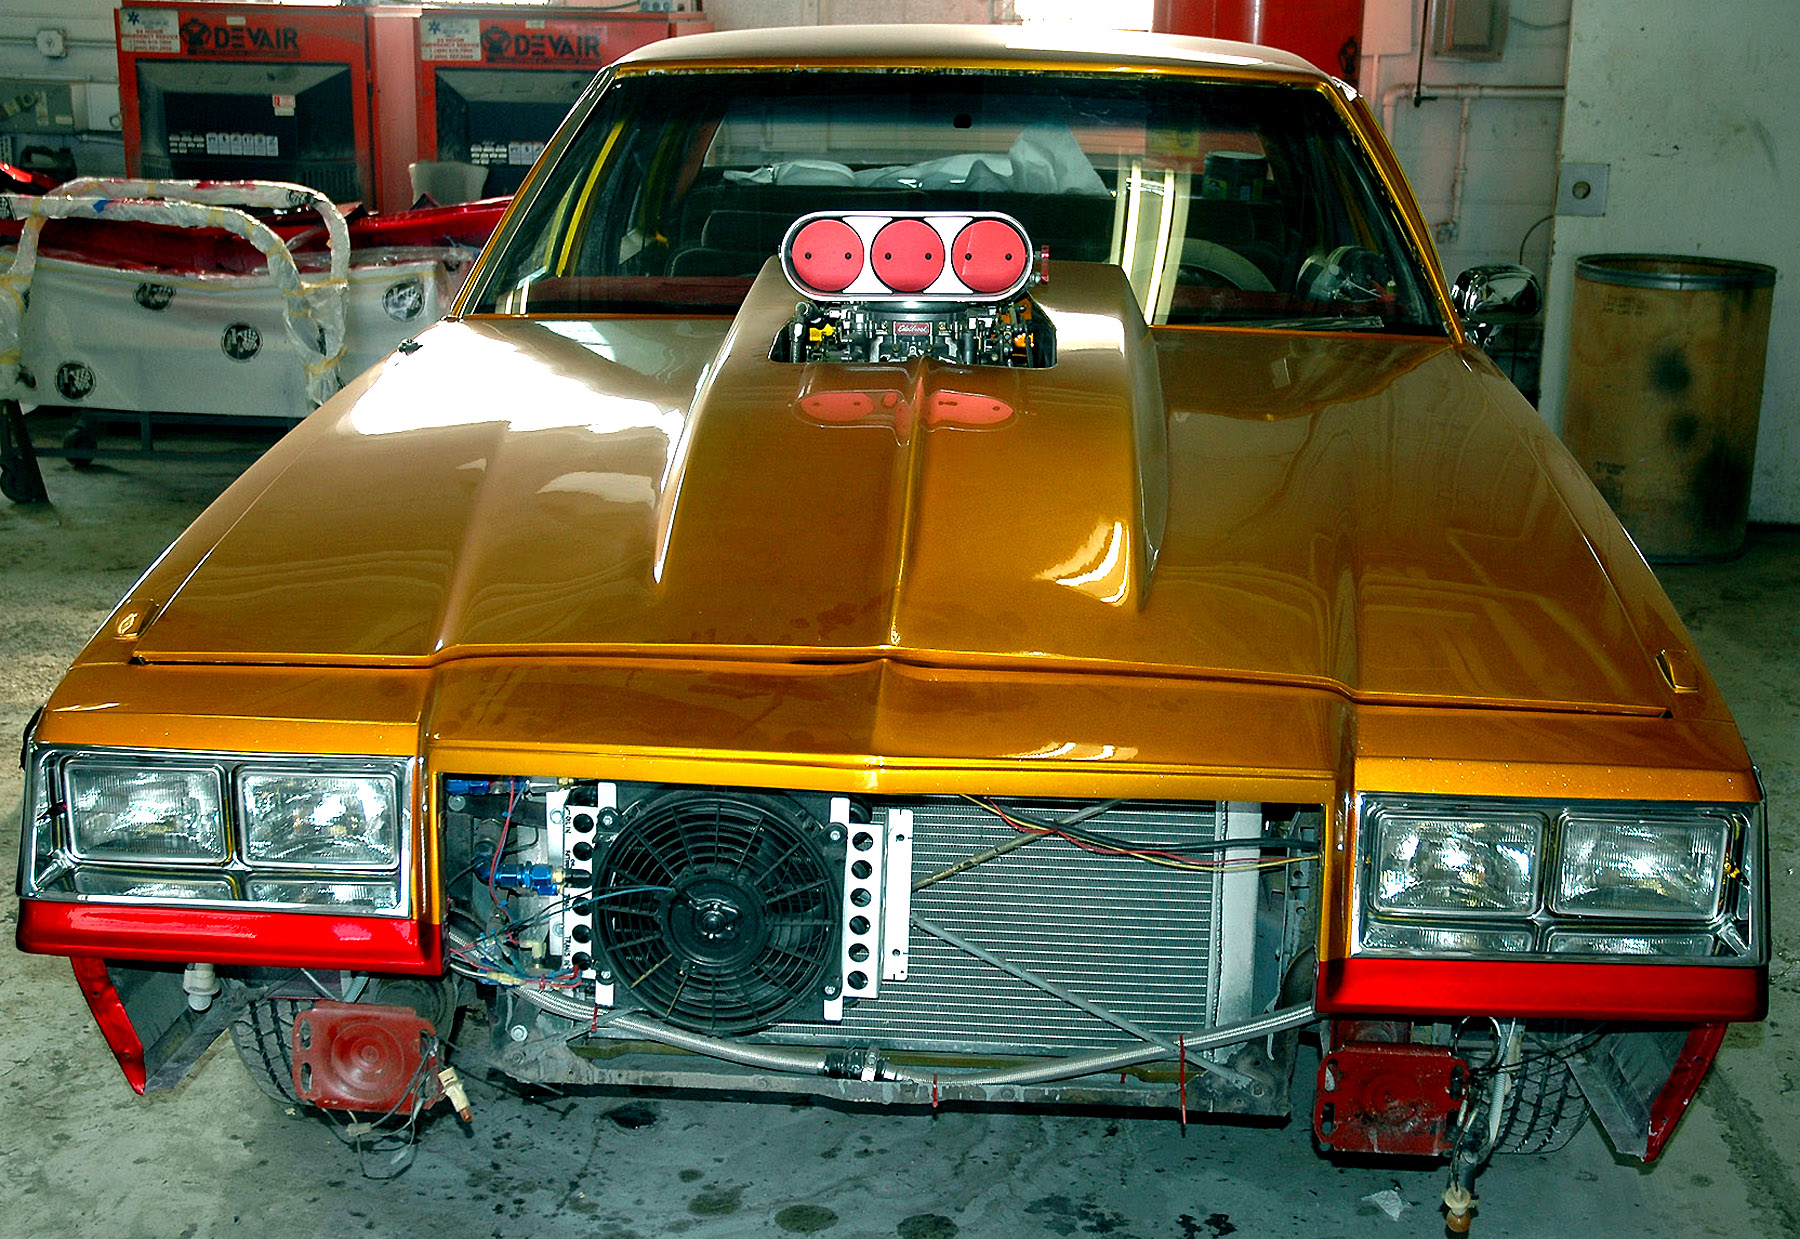 buick-kandy-paint-in-spray-booth-6814.jpg